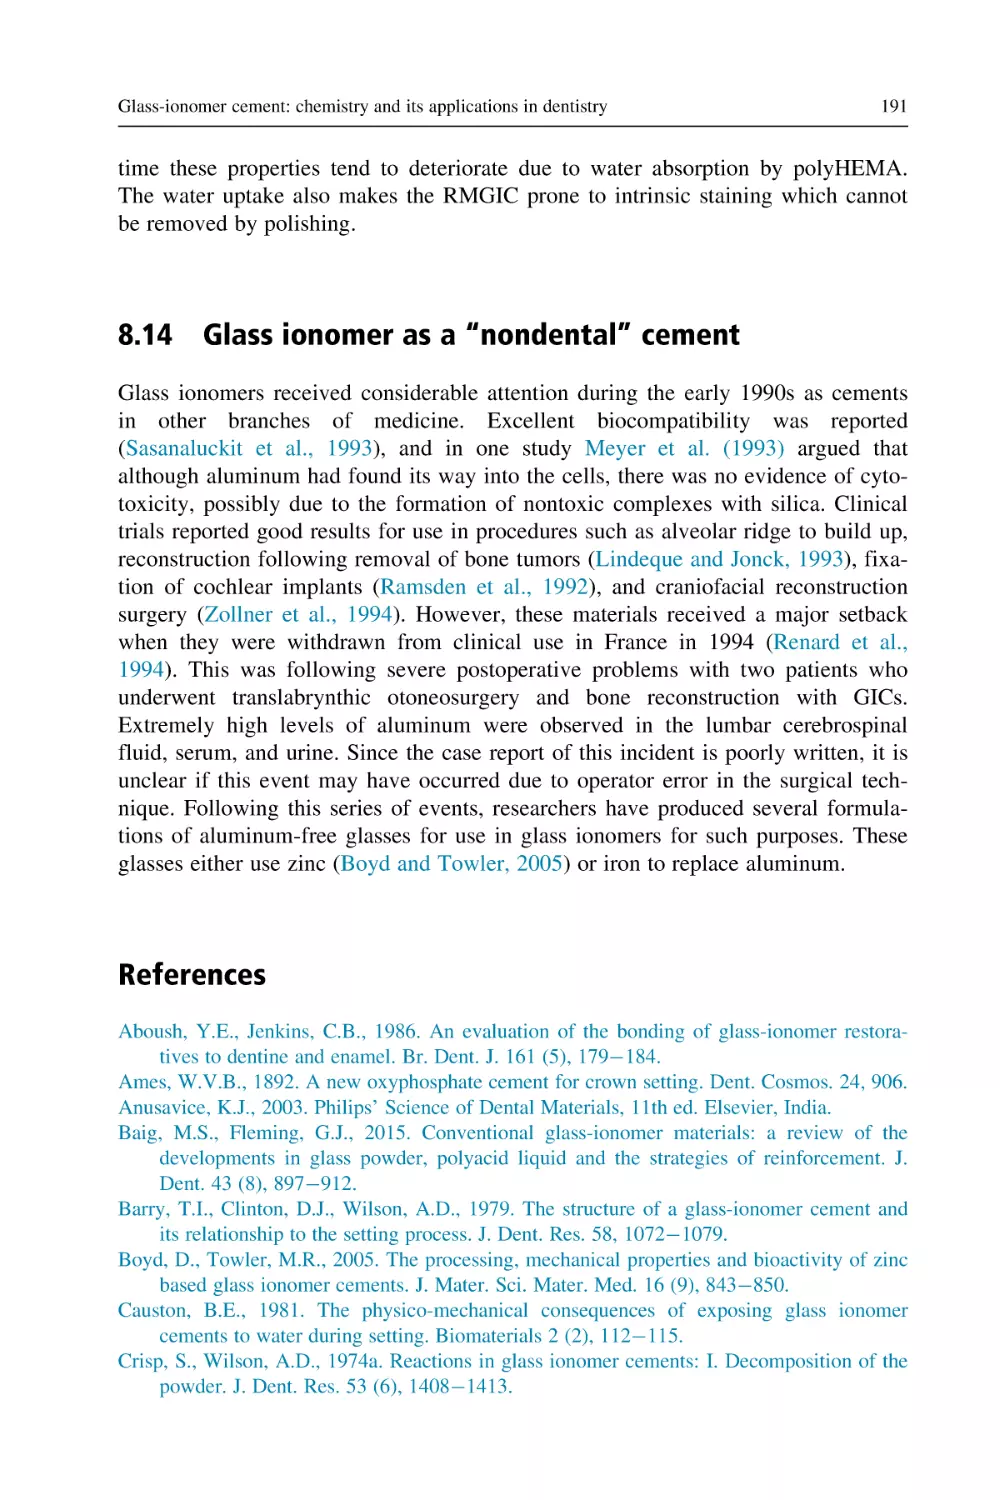 8.14 Glass ionomer as a “nondental” cement
References